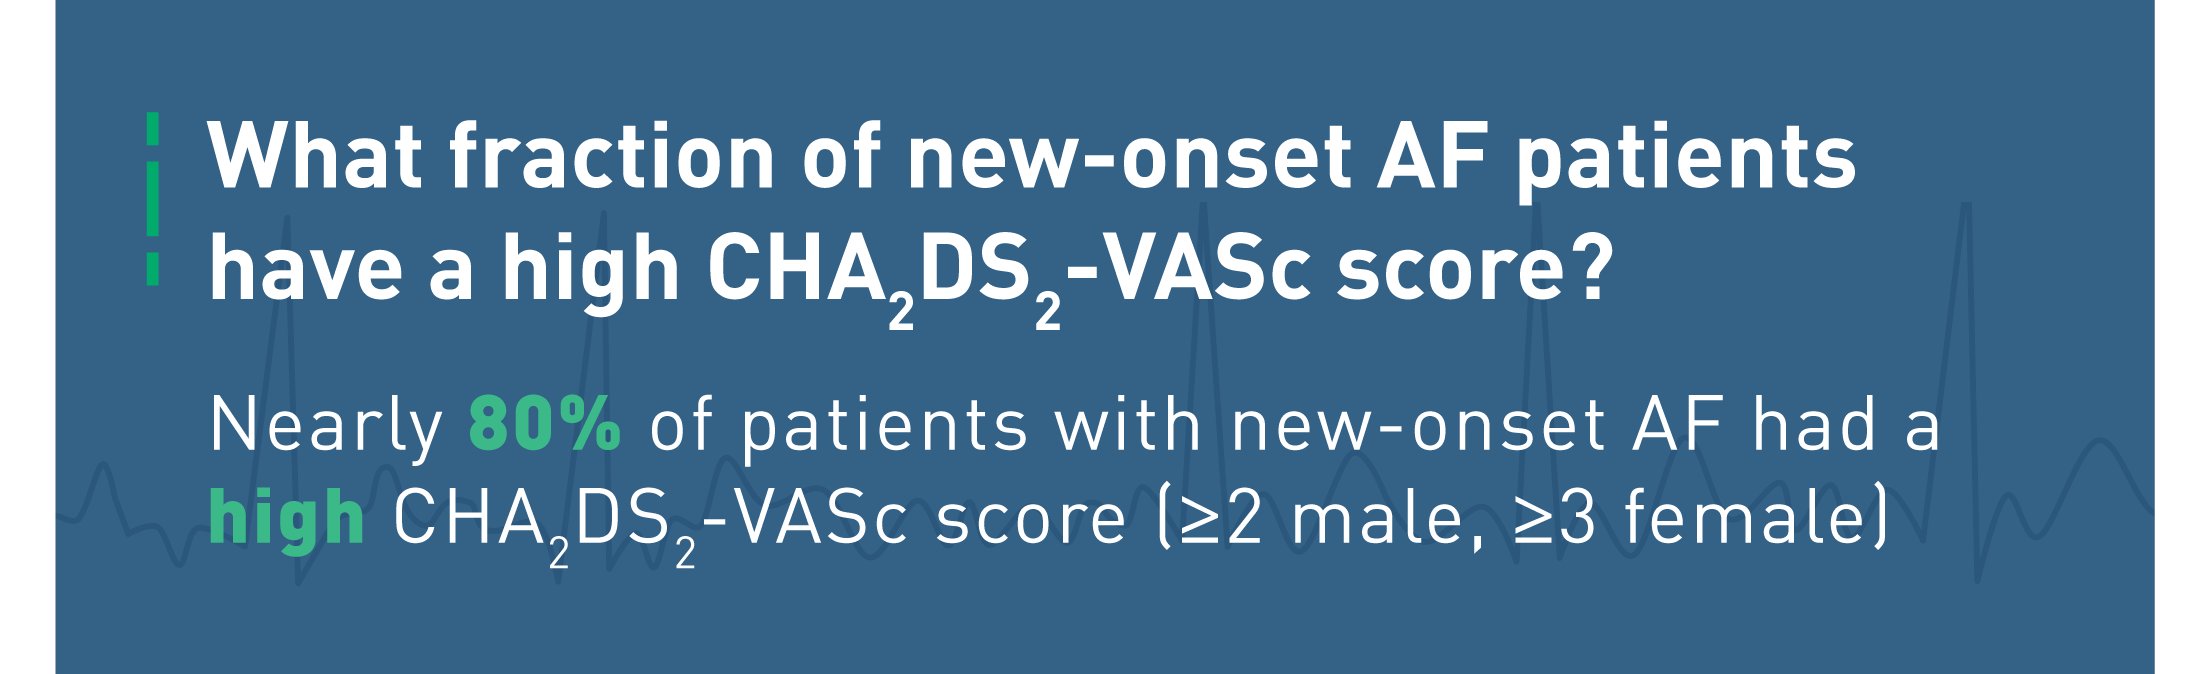 What fraction of new-onset AF patients have a high CHA2DS2-VASc score?